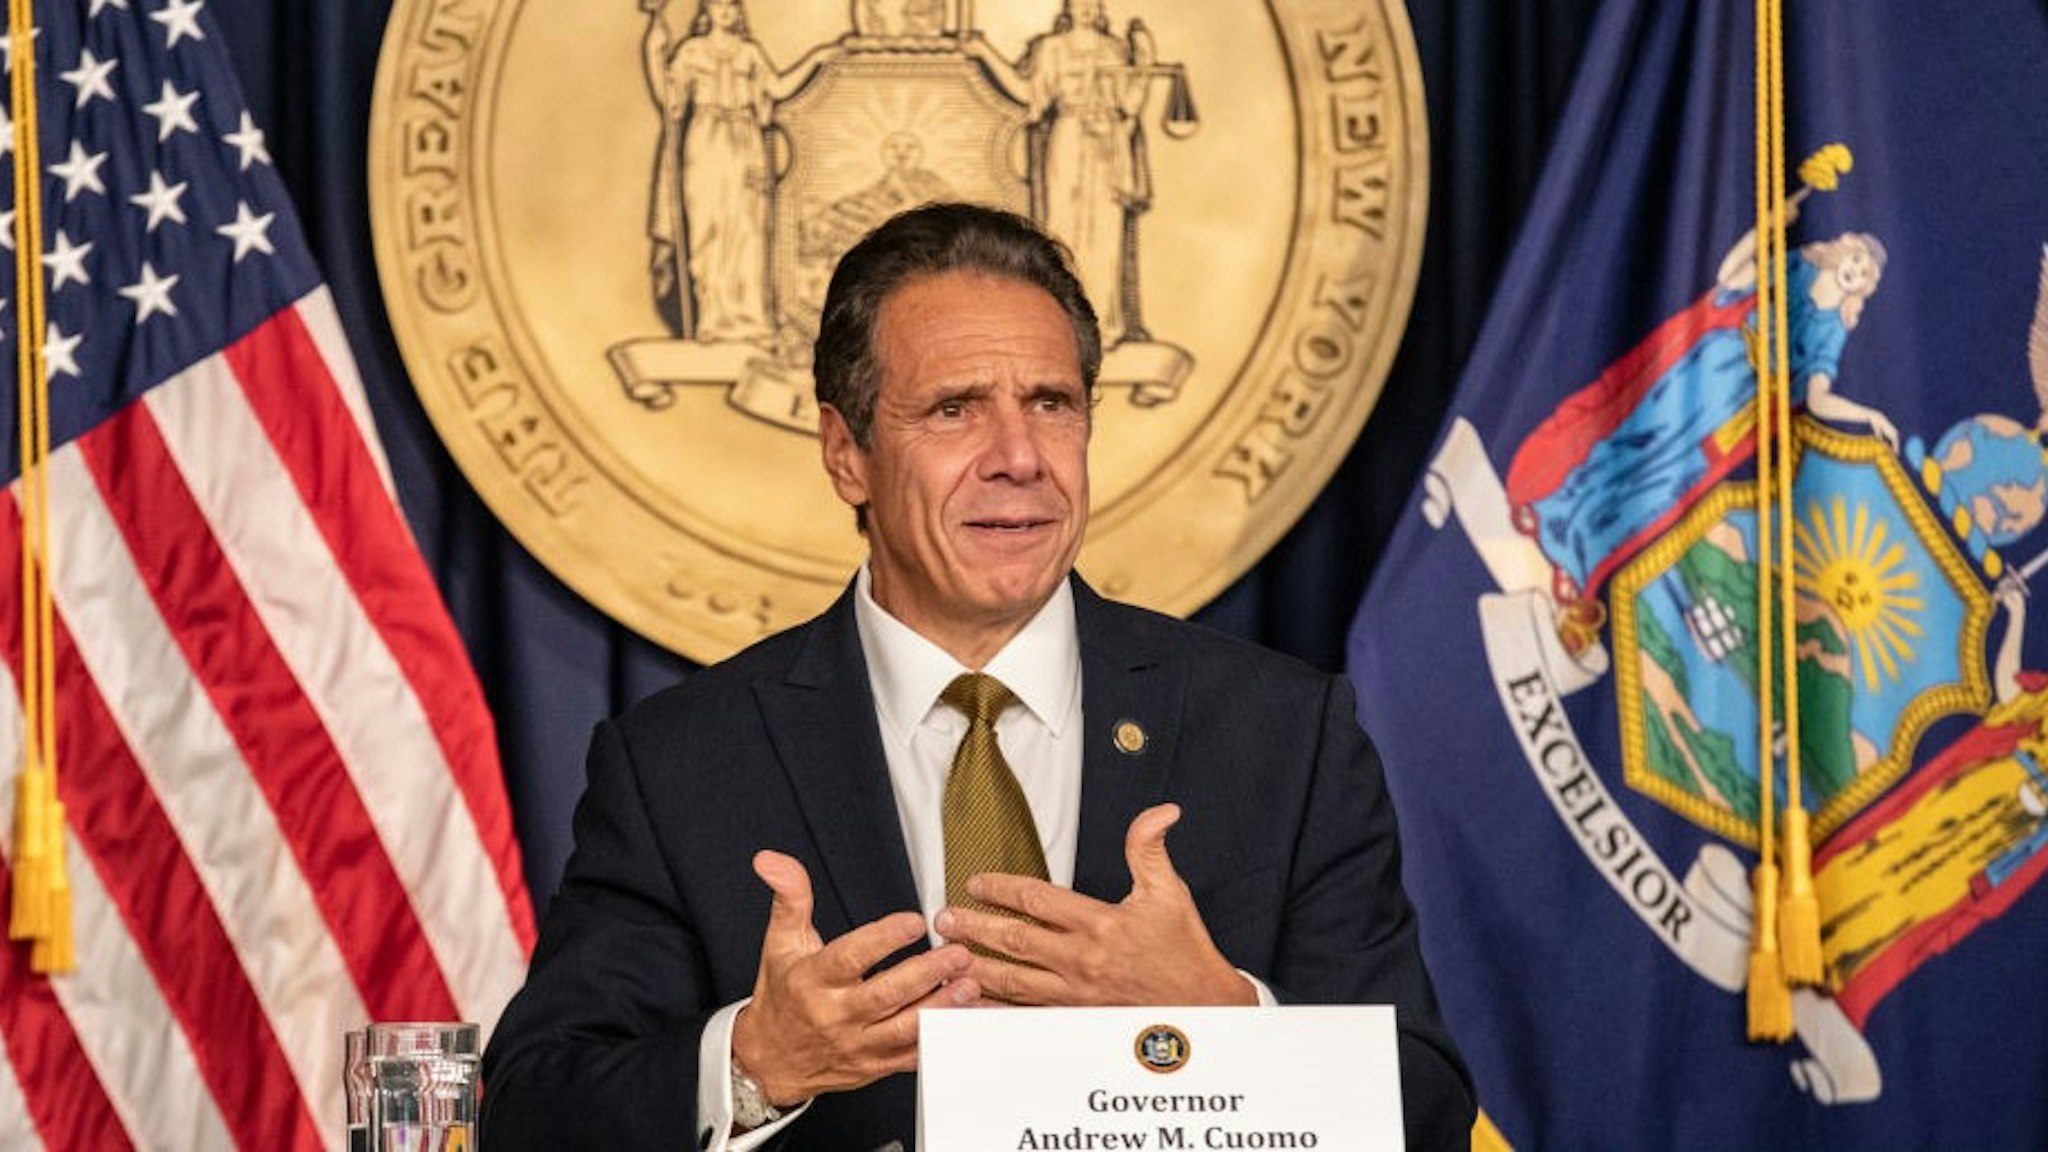 Andrew Cuomo, governor of New York, speaks during a news conference in New York, U.S., on Monday, Oct. 5, 2020. Governor Cuomo said New York City public and private schools in viral hot spots must close Tuesday, and he threatened to shut religious institutions if members dont follow rules about masks and social distancing. Photographer: